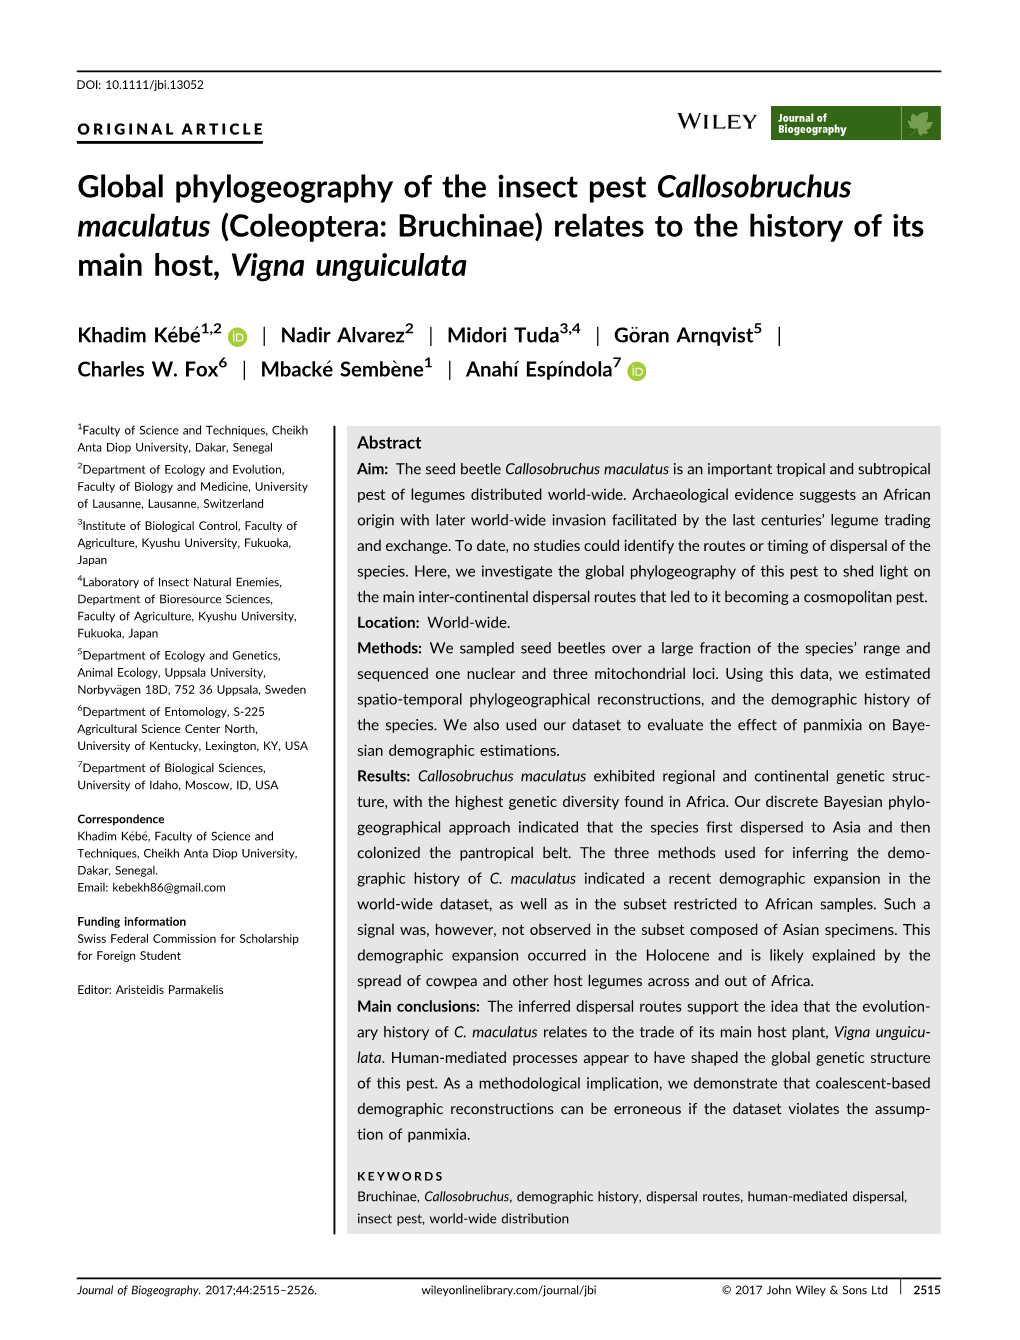 Global Phylogeography of the Insect Pest Callosobruchus Maculatus (Coleoptera: Bruchinae) Relates to the History of Its Main Host, Vigna Unguiculata